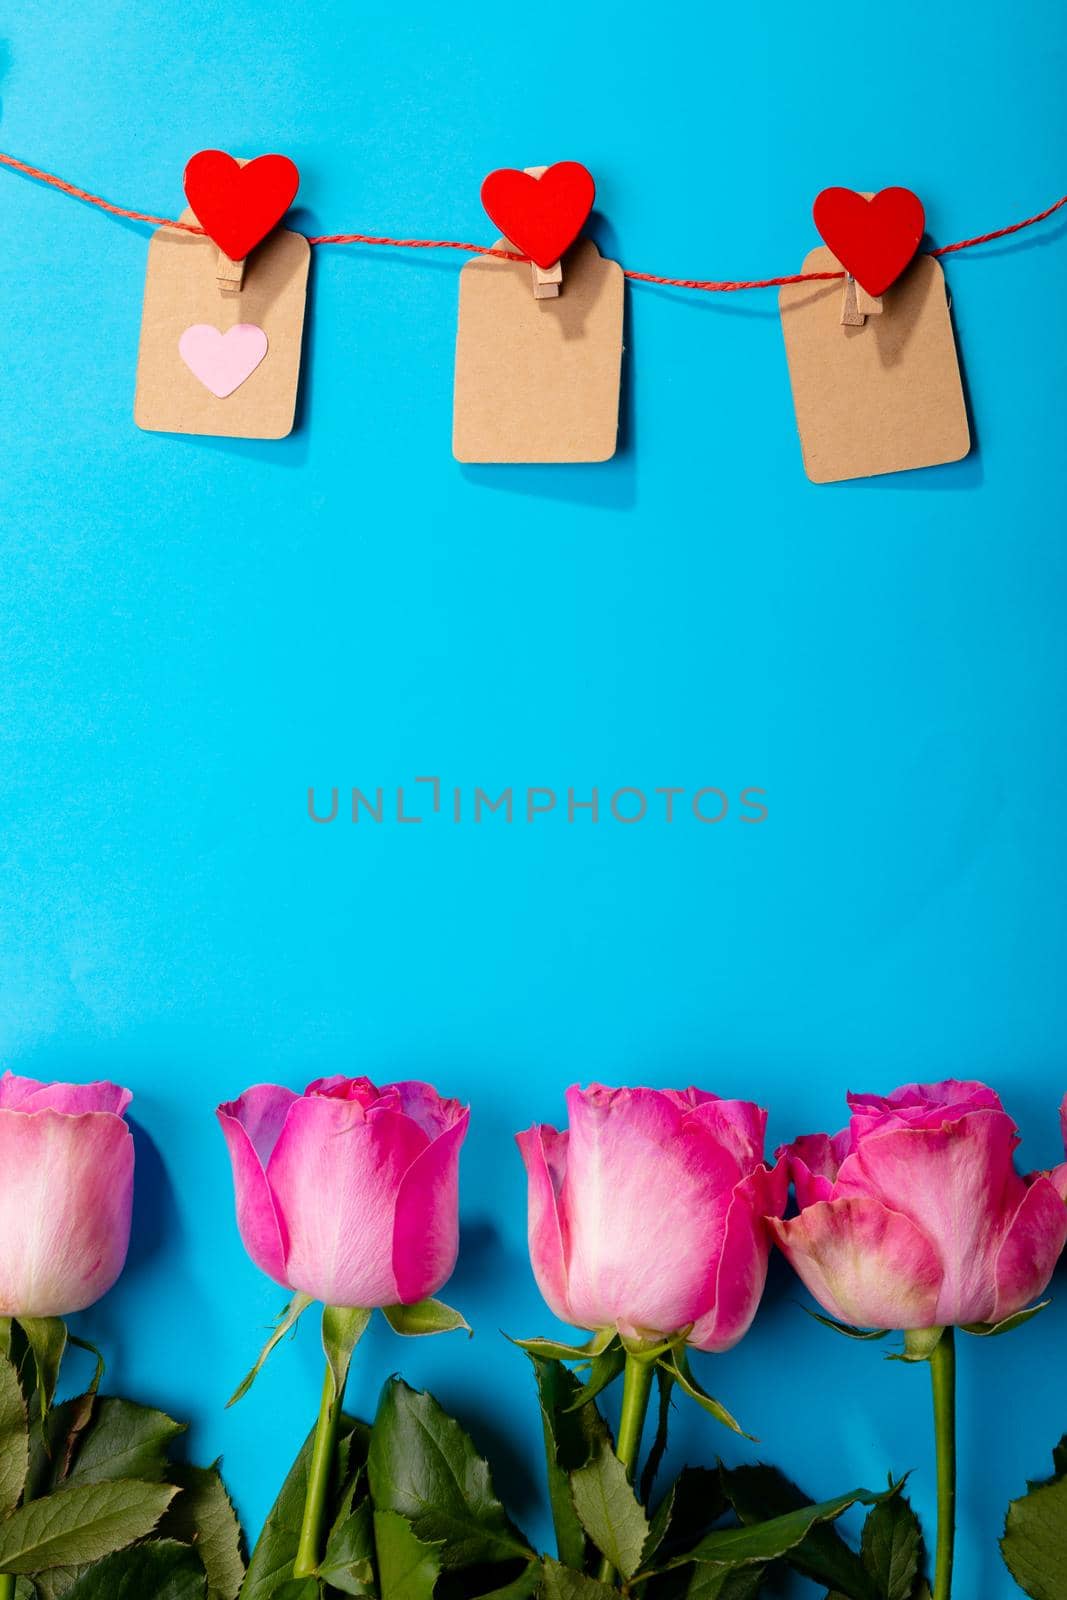 Red heart shapes on clothespins hanging from clothesline over pink roses against blue background. love and valentine decoration with copy space.